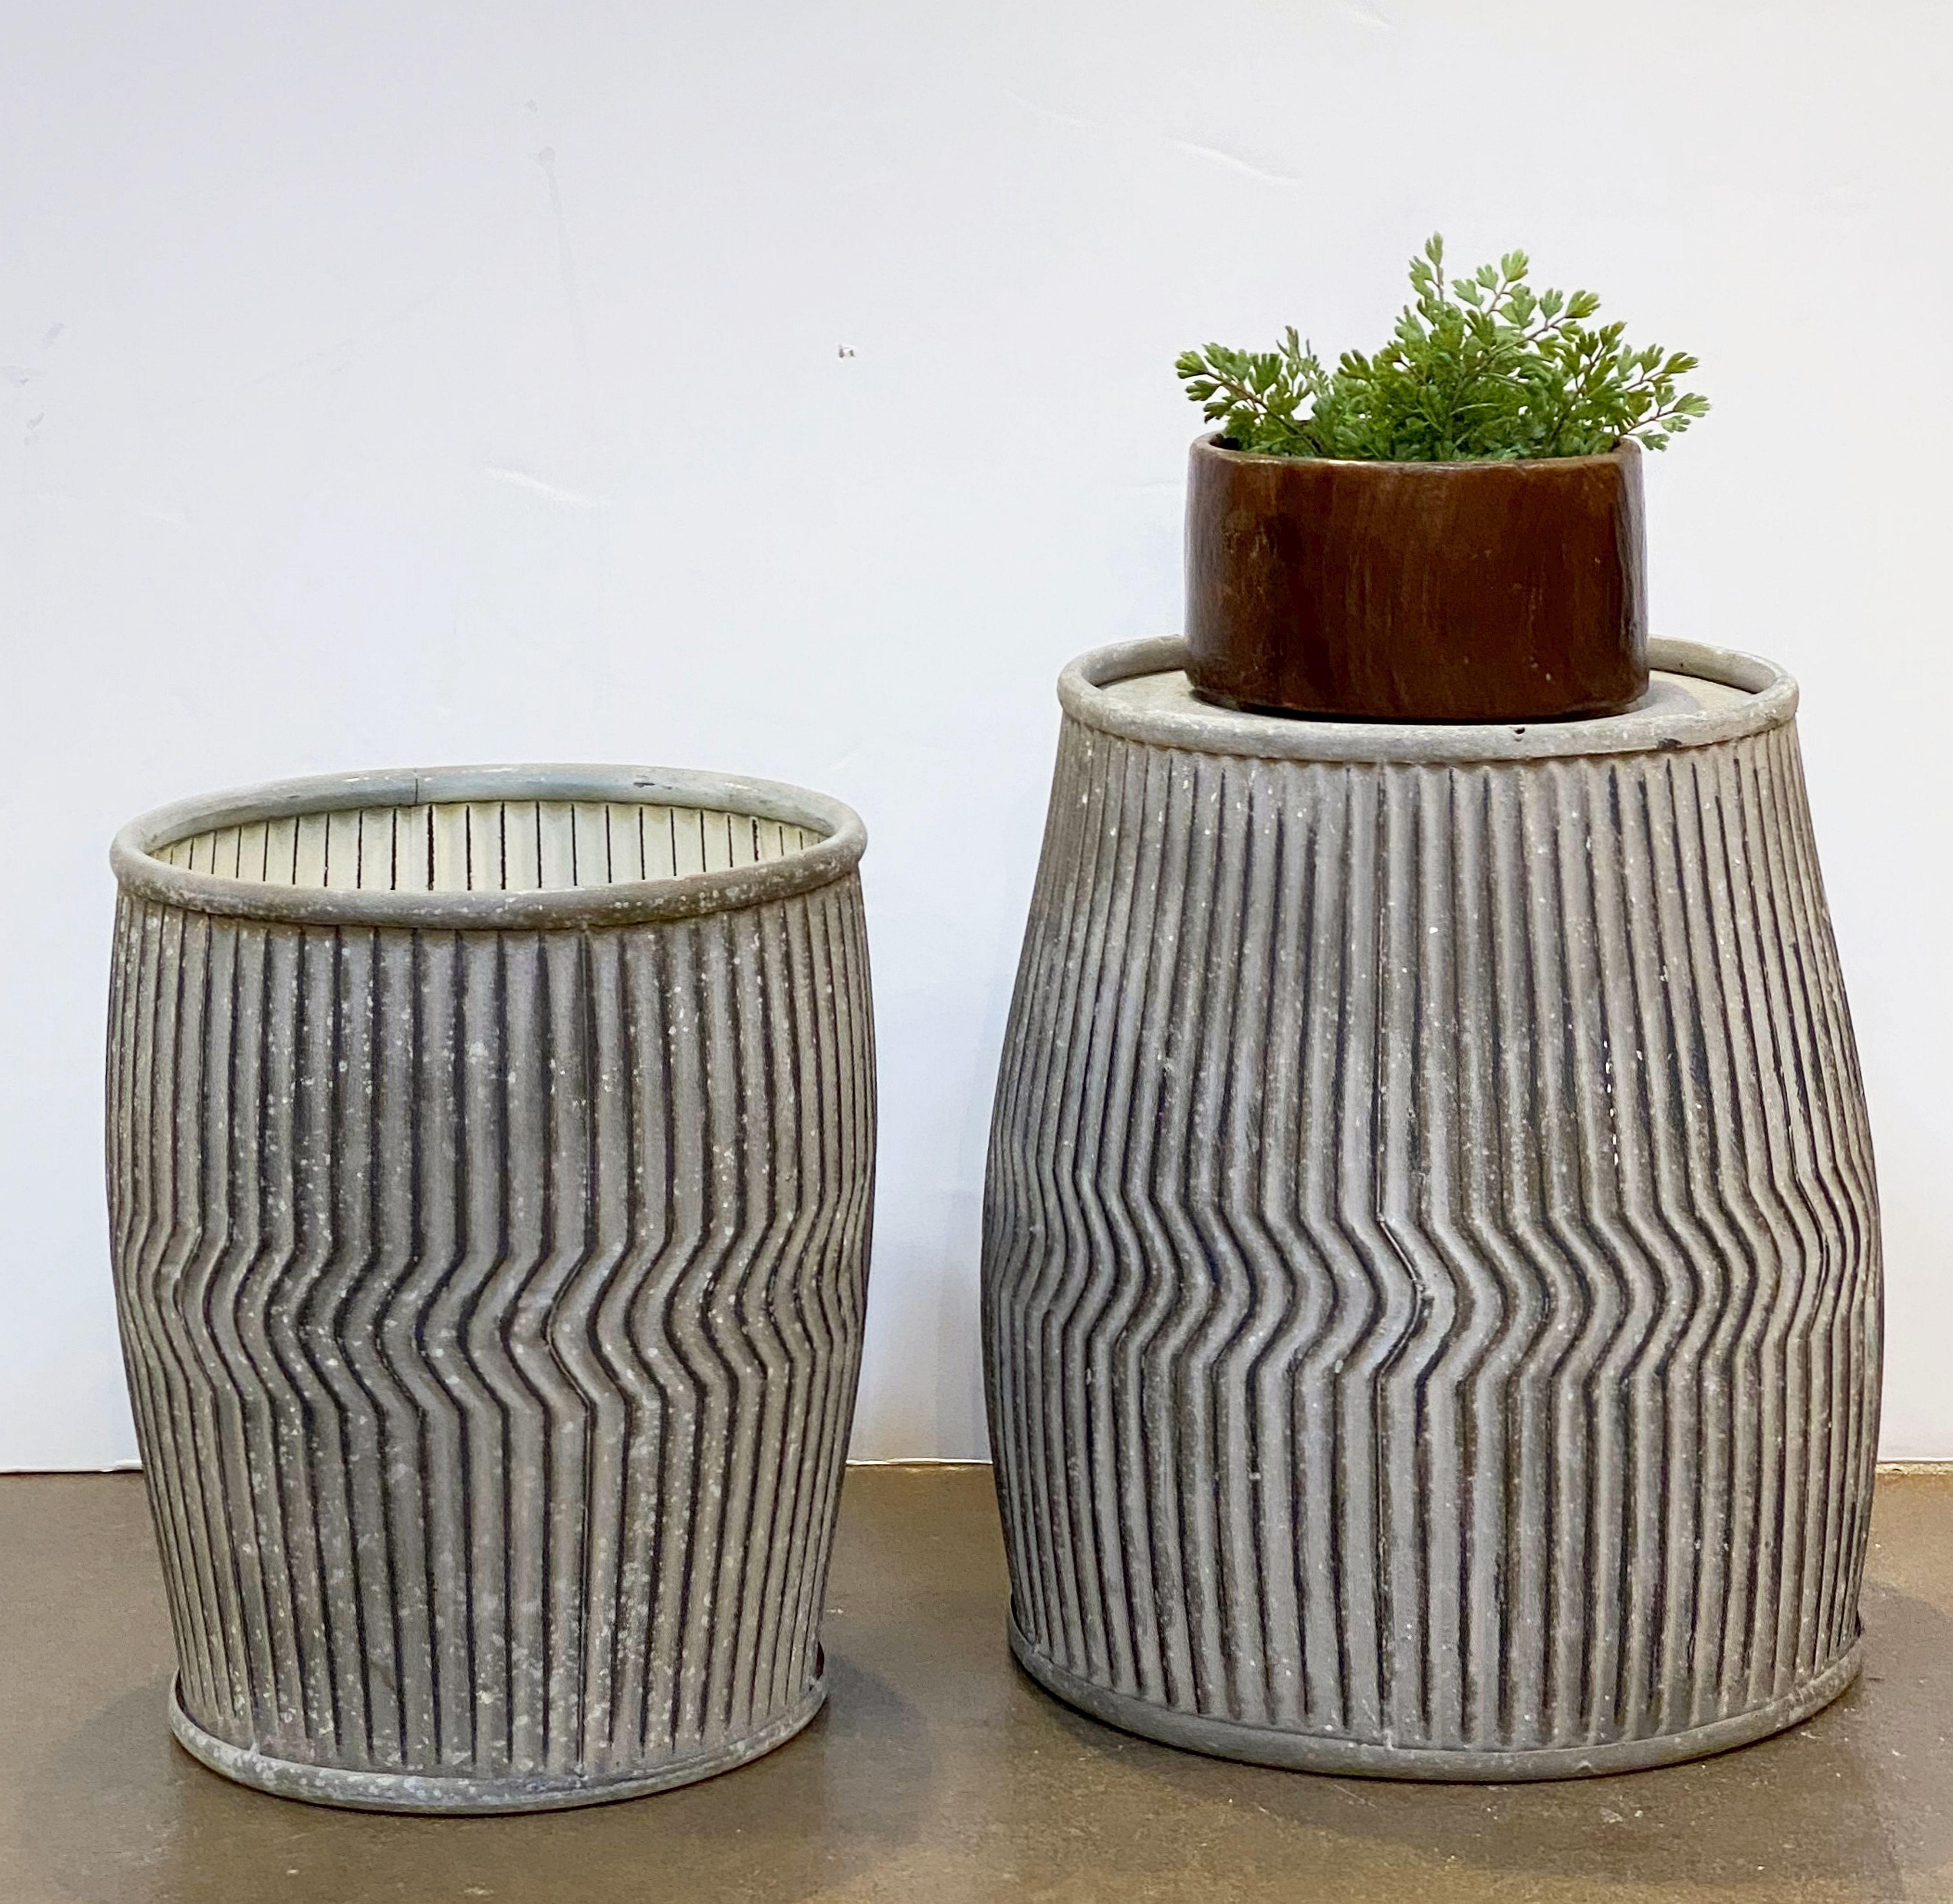 A fine medium-sized (Height 18 3/4 in x Diameter 16 1/2 in) French garden pot or dolly tub planter of zinc, featuring a ribbed design to the circumference, with rolled edge top and base.

Can be turned upside down for use as a table.

Perfect for a